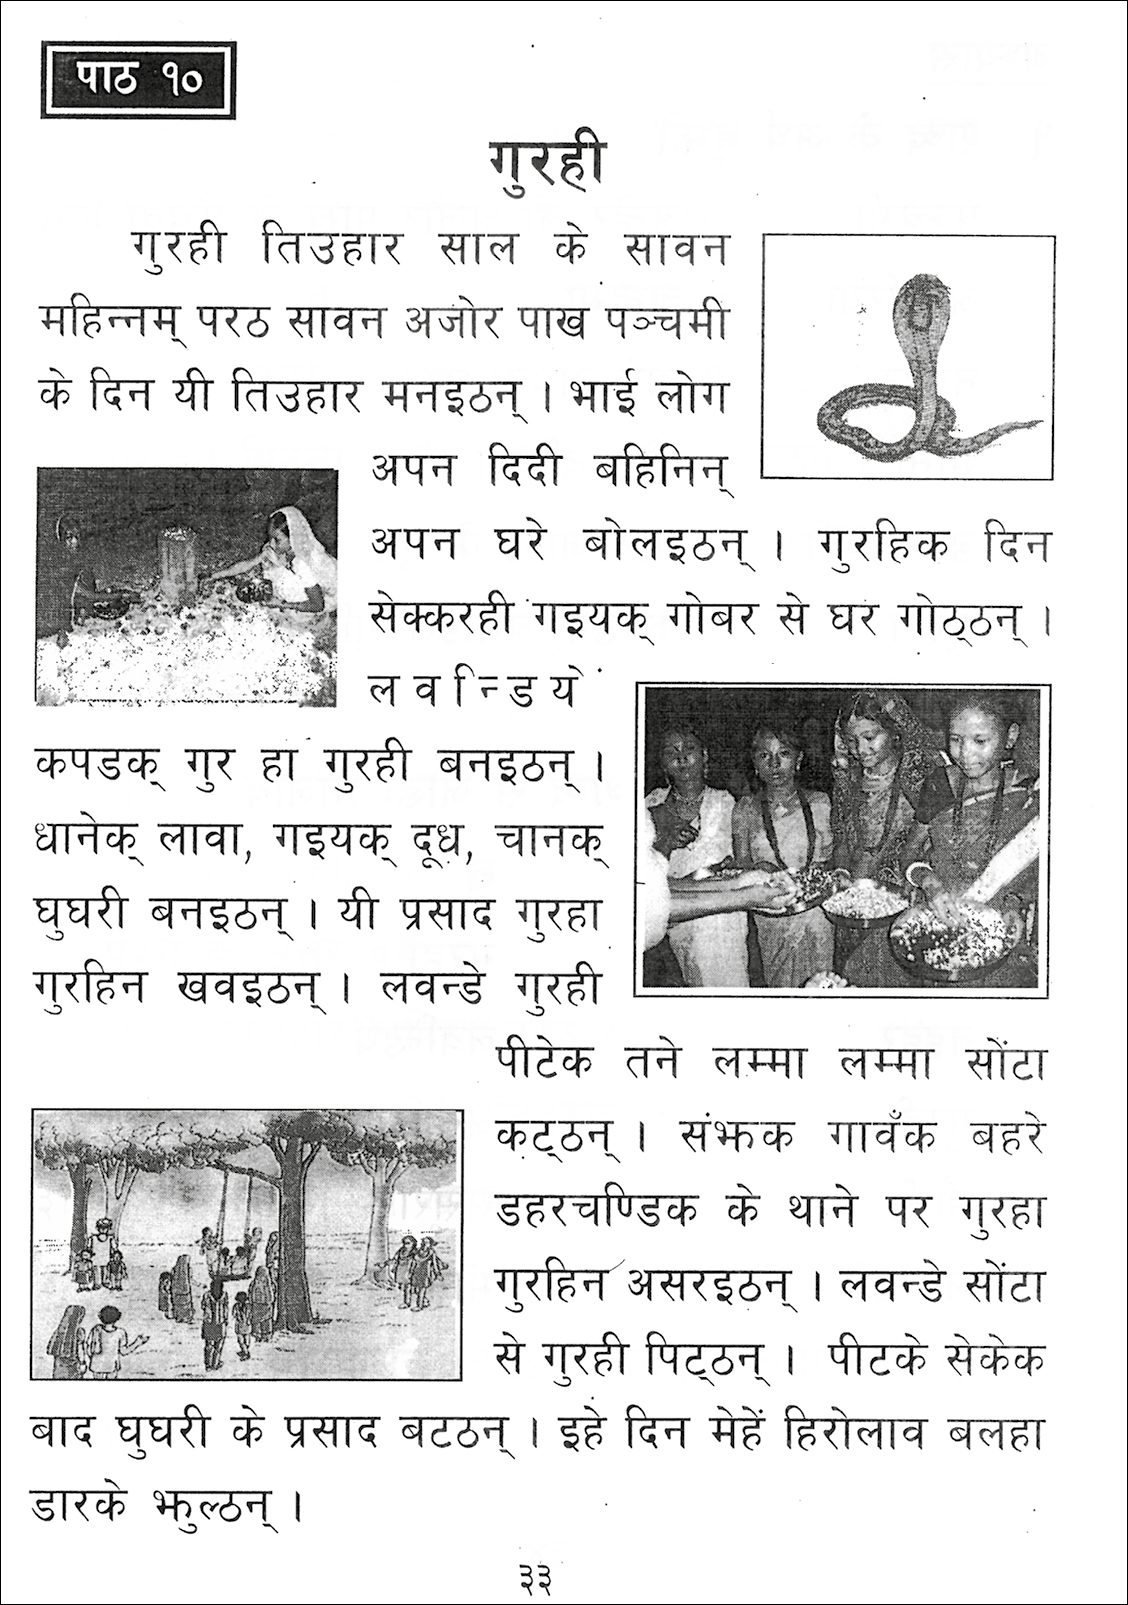 Fig. 3.3.  Class 2 Tharu textbook, lesson 10, page 33. Photograph supplied by the author with the consent of the textbook publishers, CC BY.